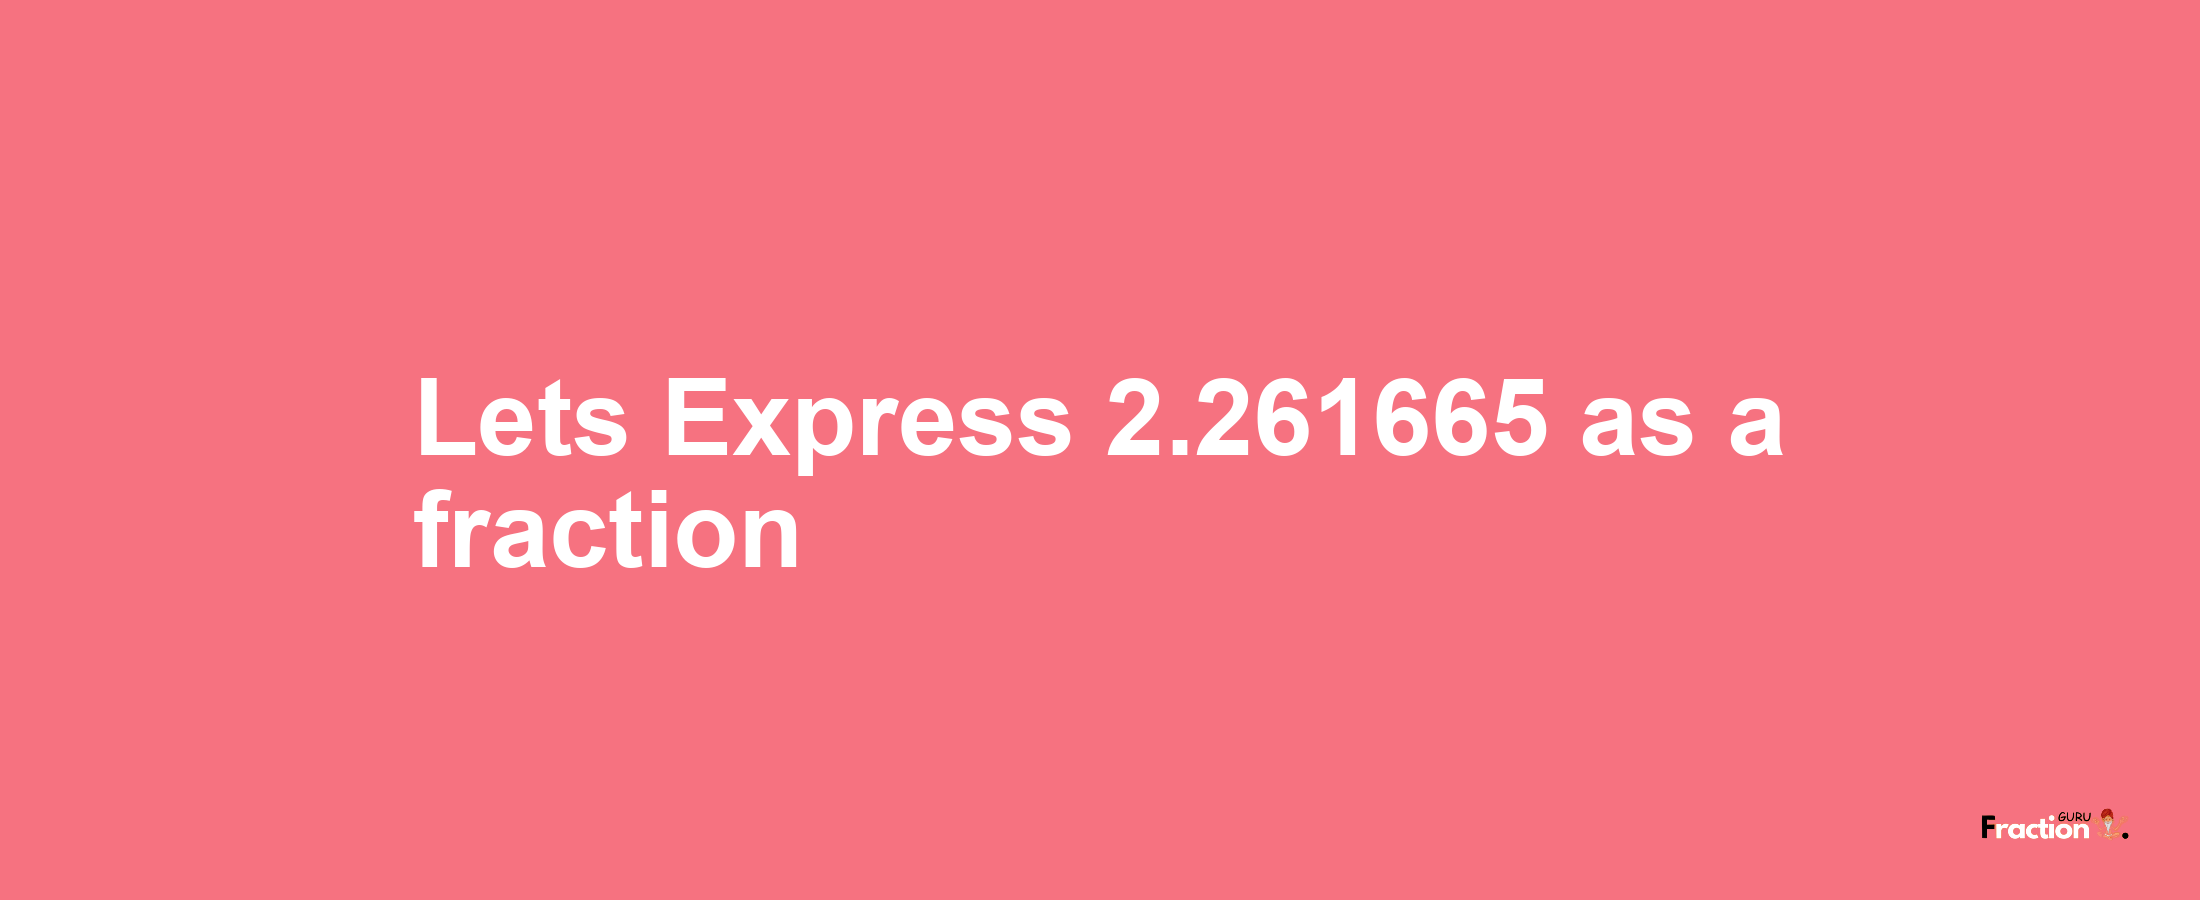 Lets Express 2.261665 as afraction